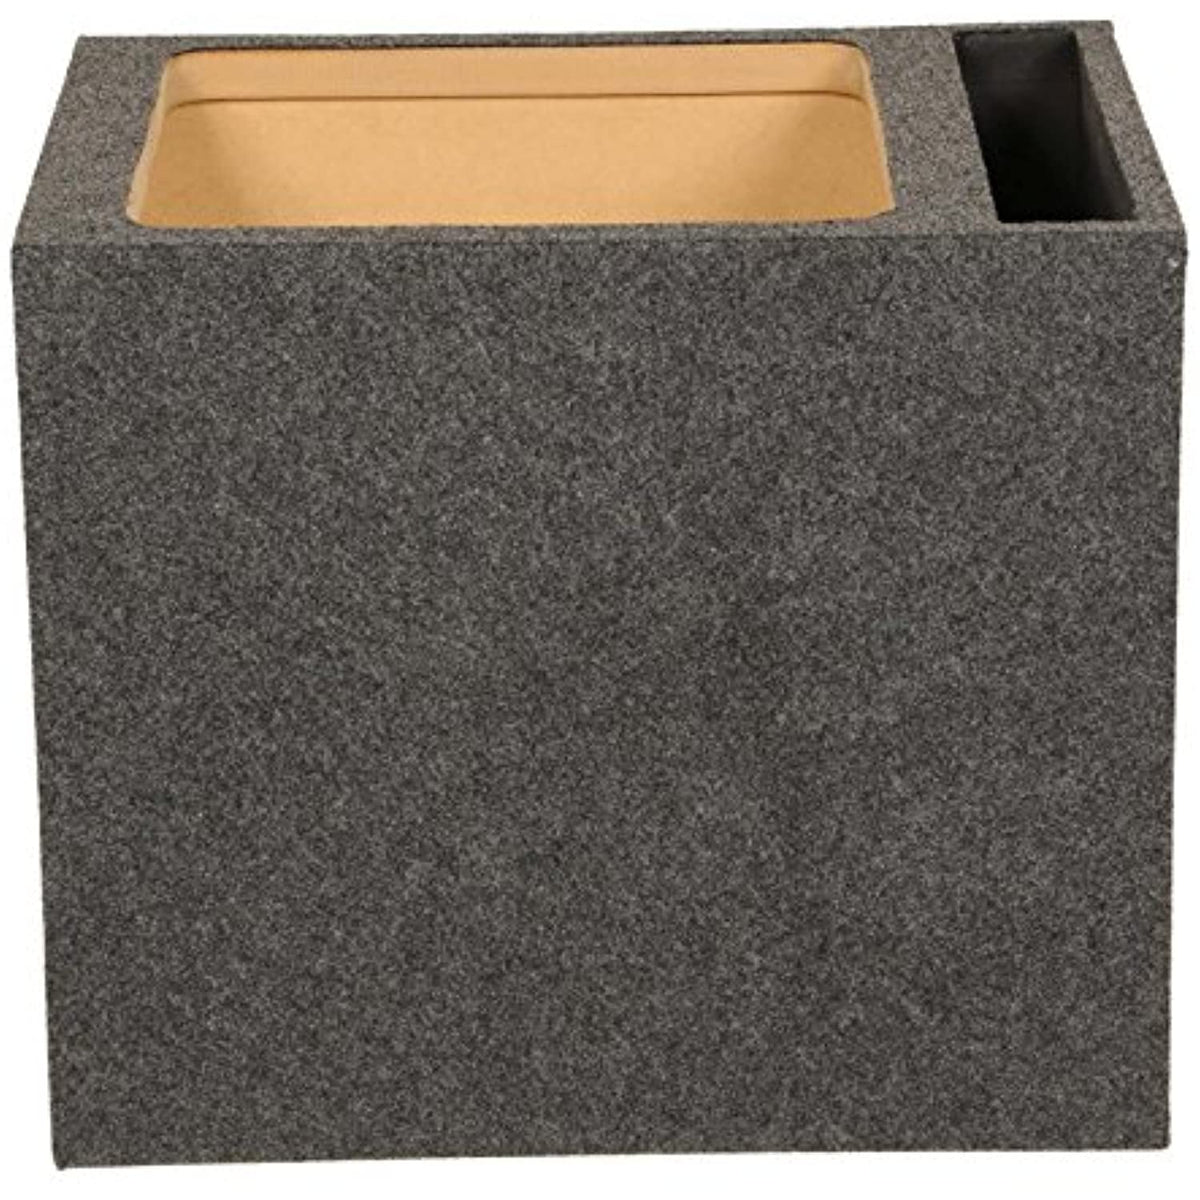 QPower 15 Inch Heavy-Duty Single Vented Carpet Covered Durable Car Audio Vehicle Subwoofer Enclosure Woofer Box, Charcoal Gray